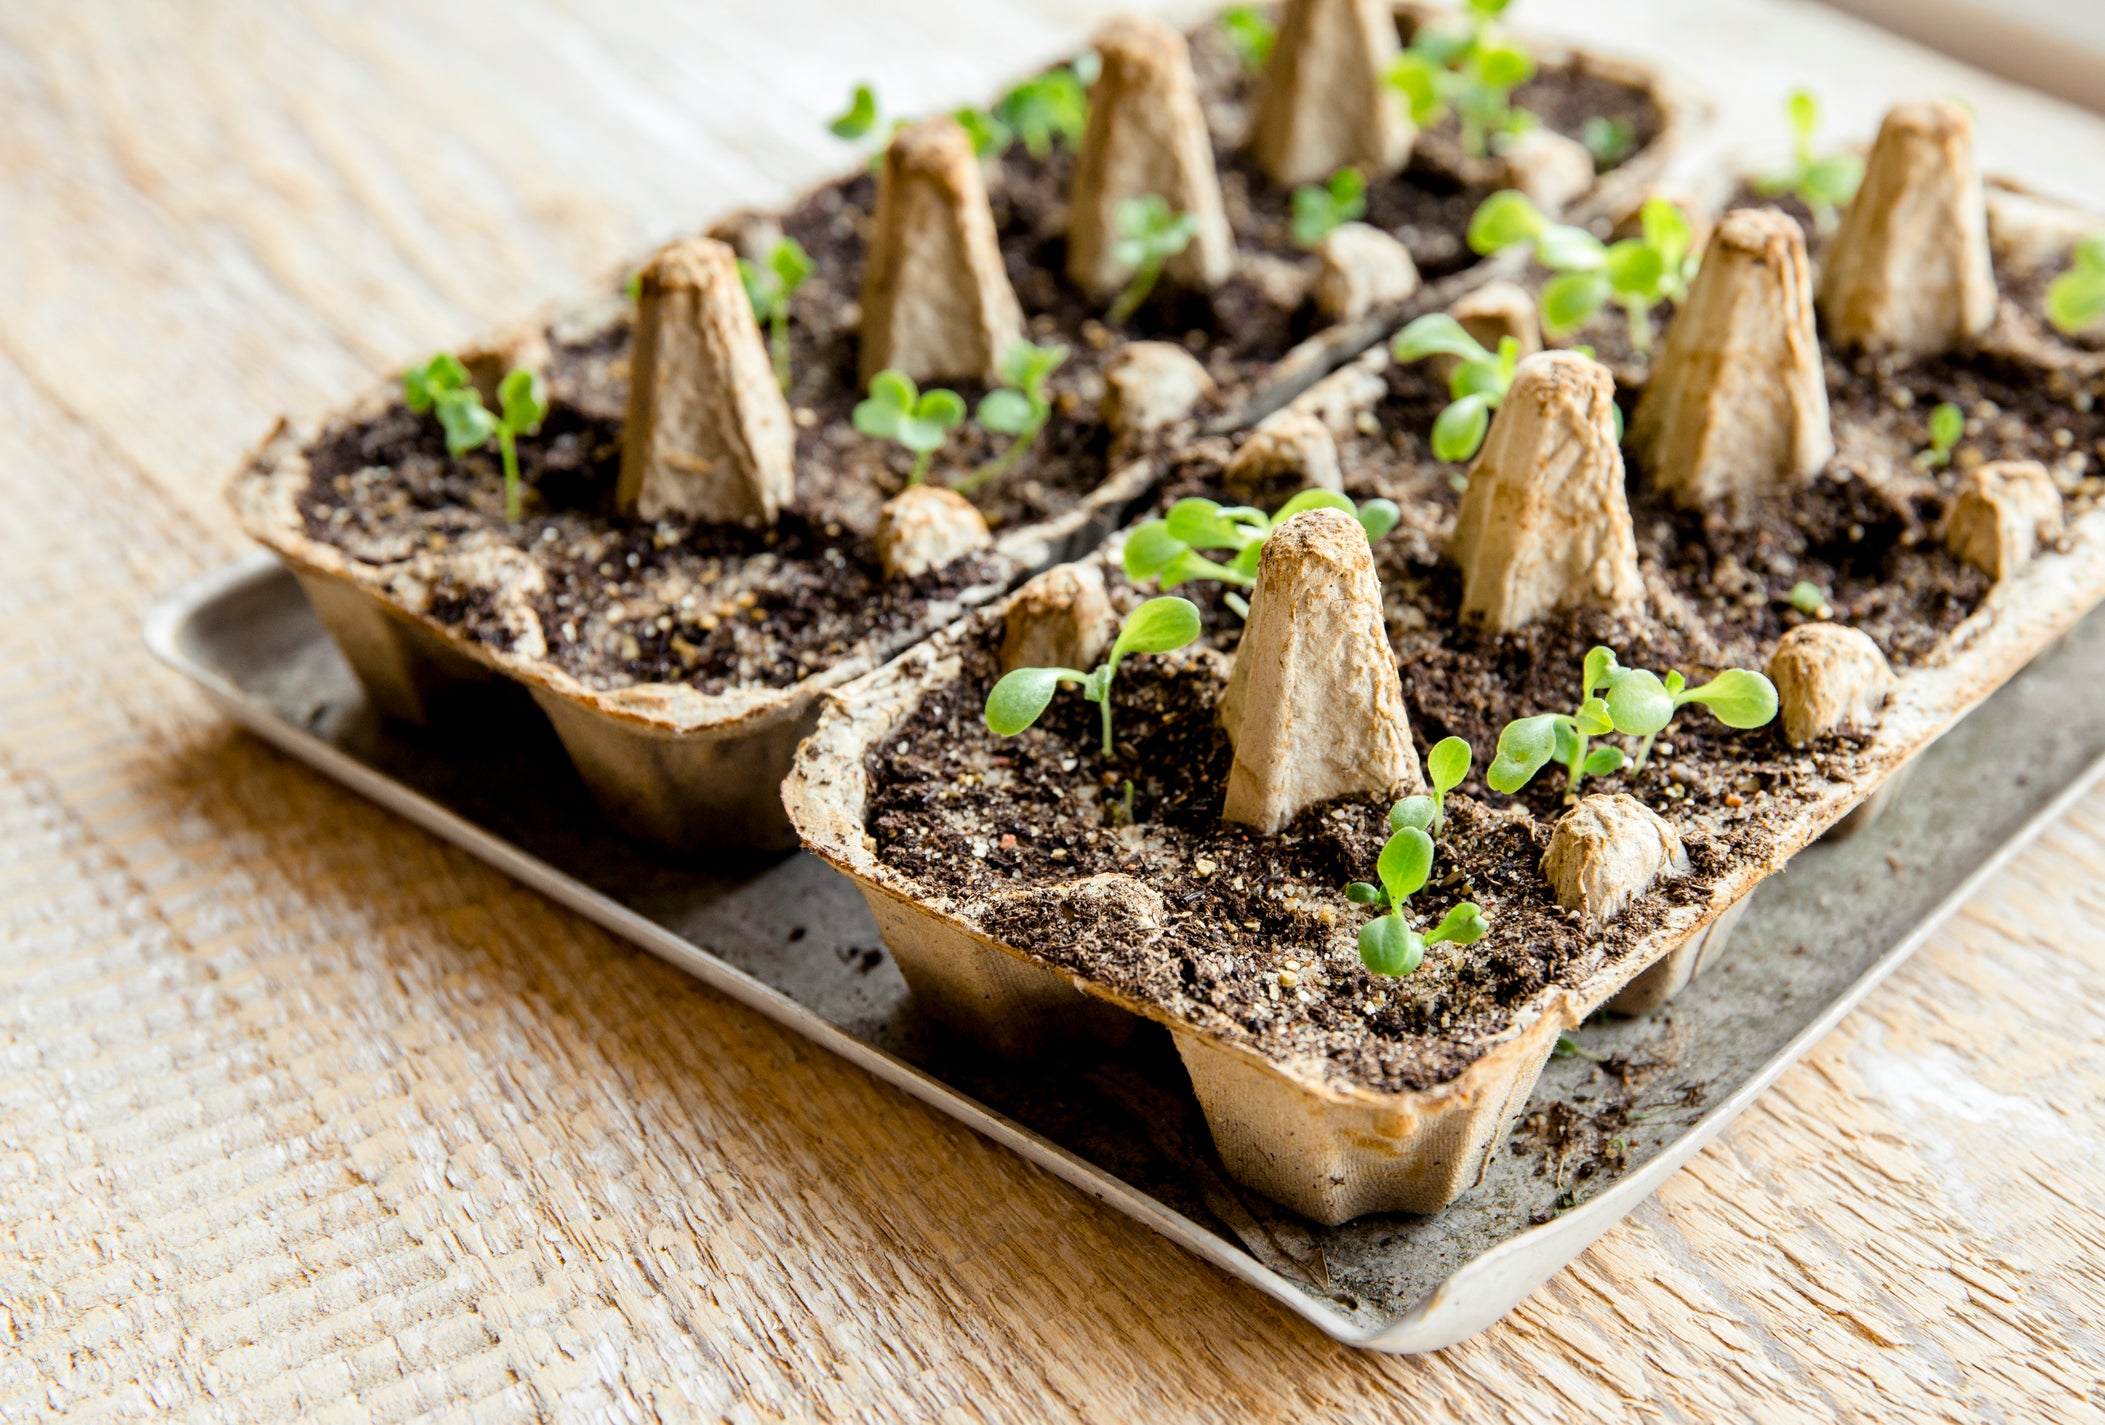 Reuse - You can reuse cardboard egg cartons for seed starting! They are naturally compostable and super easy for cute and fun projects.